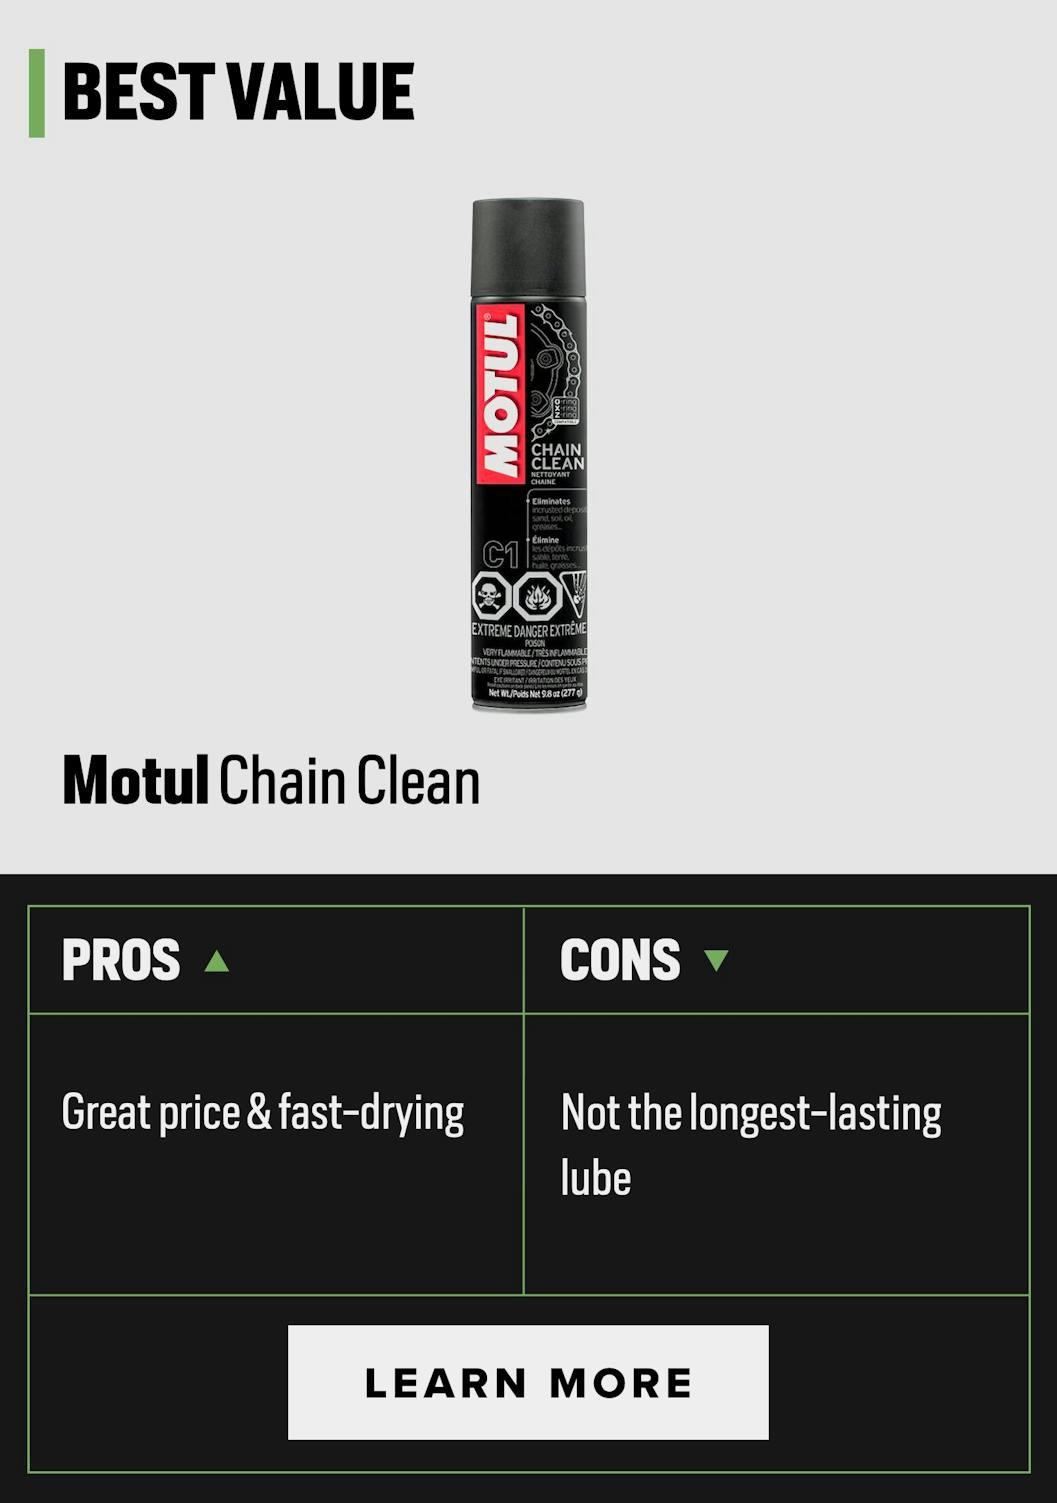 2 x Motorcycle Chain Cleaner for $26